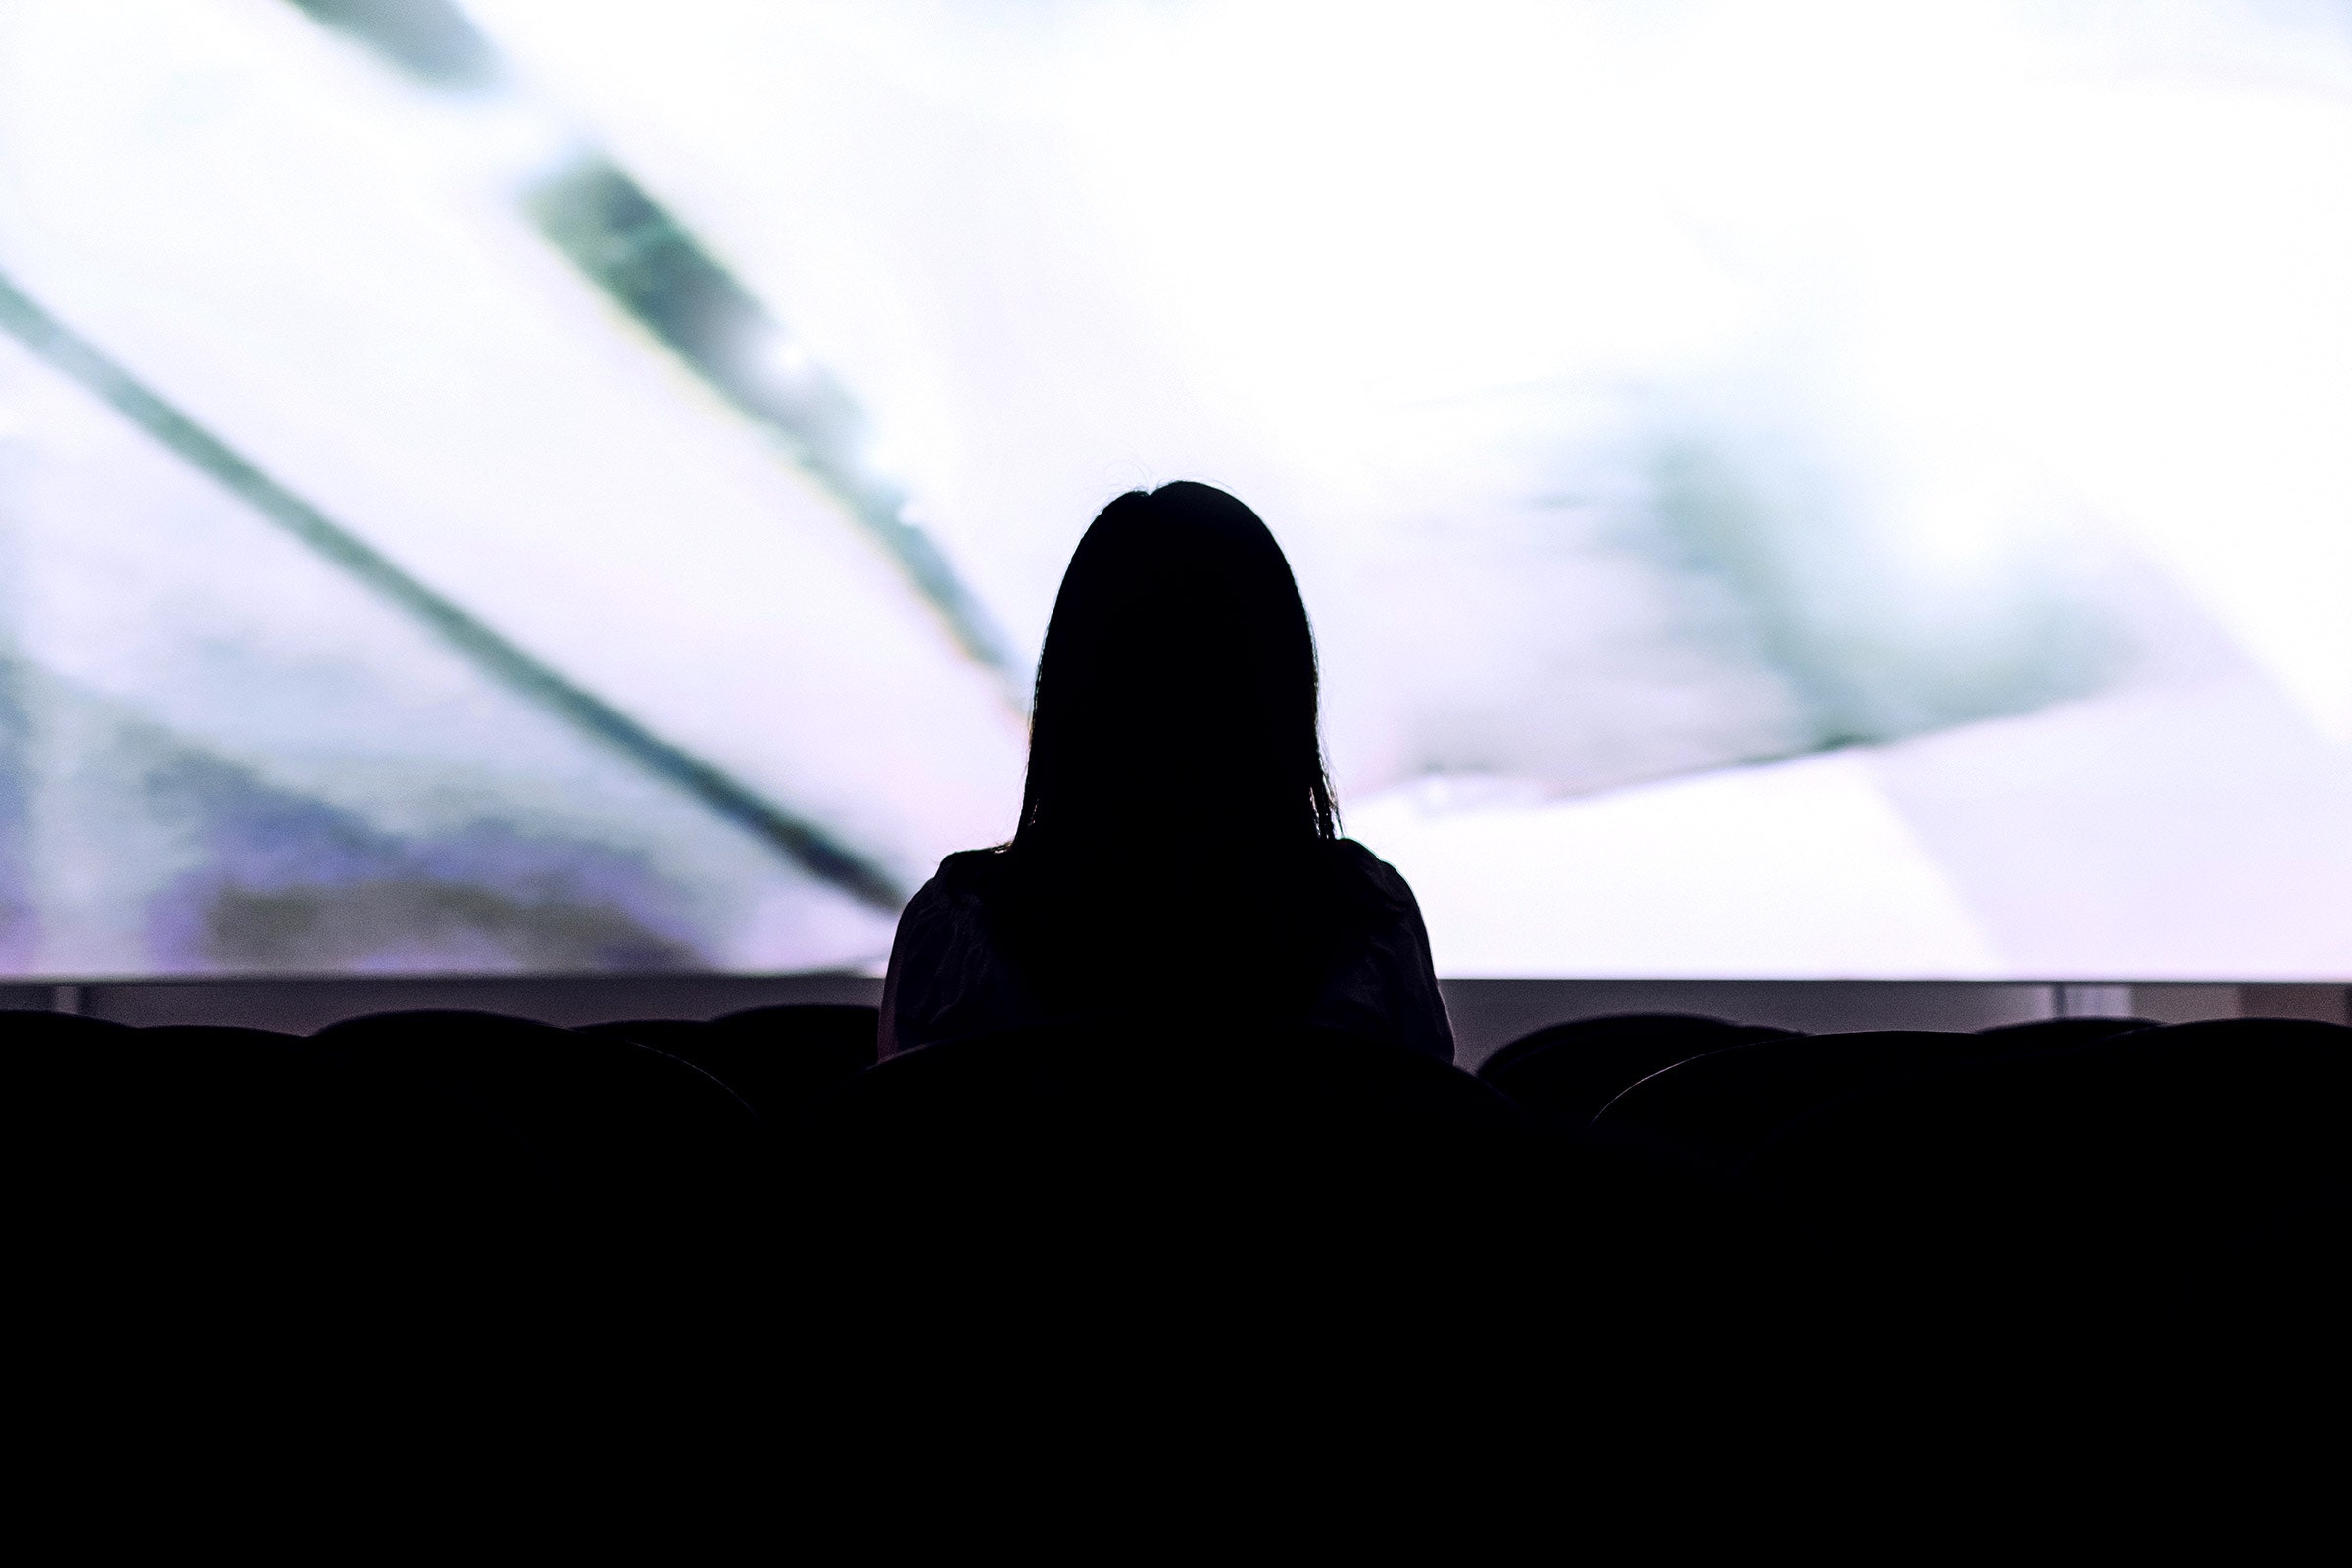 Silhouette of a person sitting in front of a large screen in a movie theater